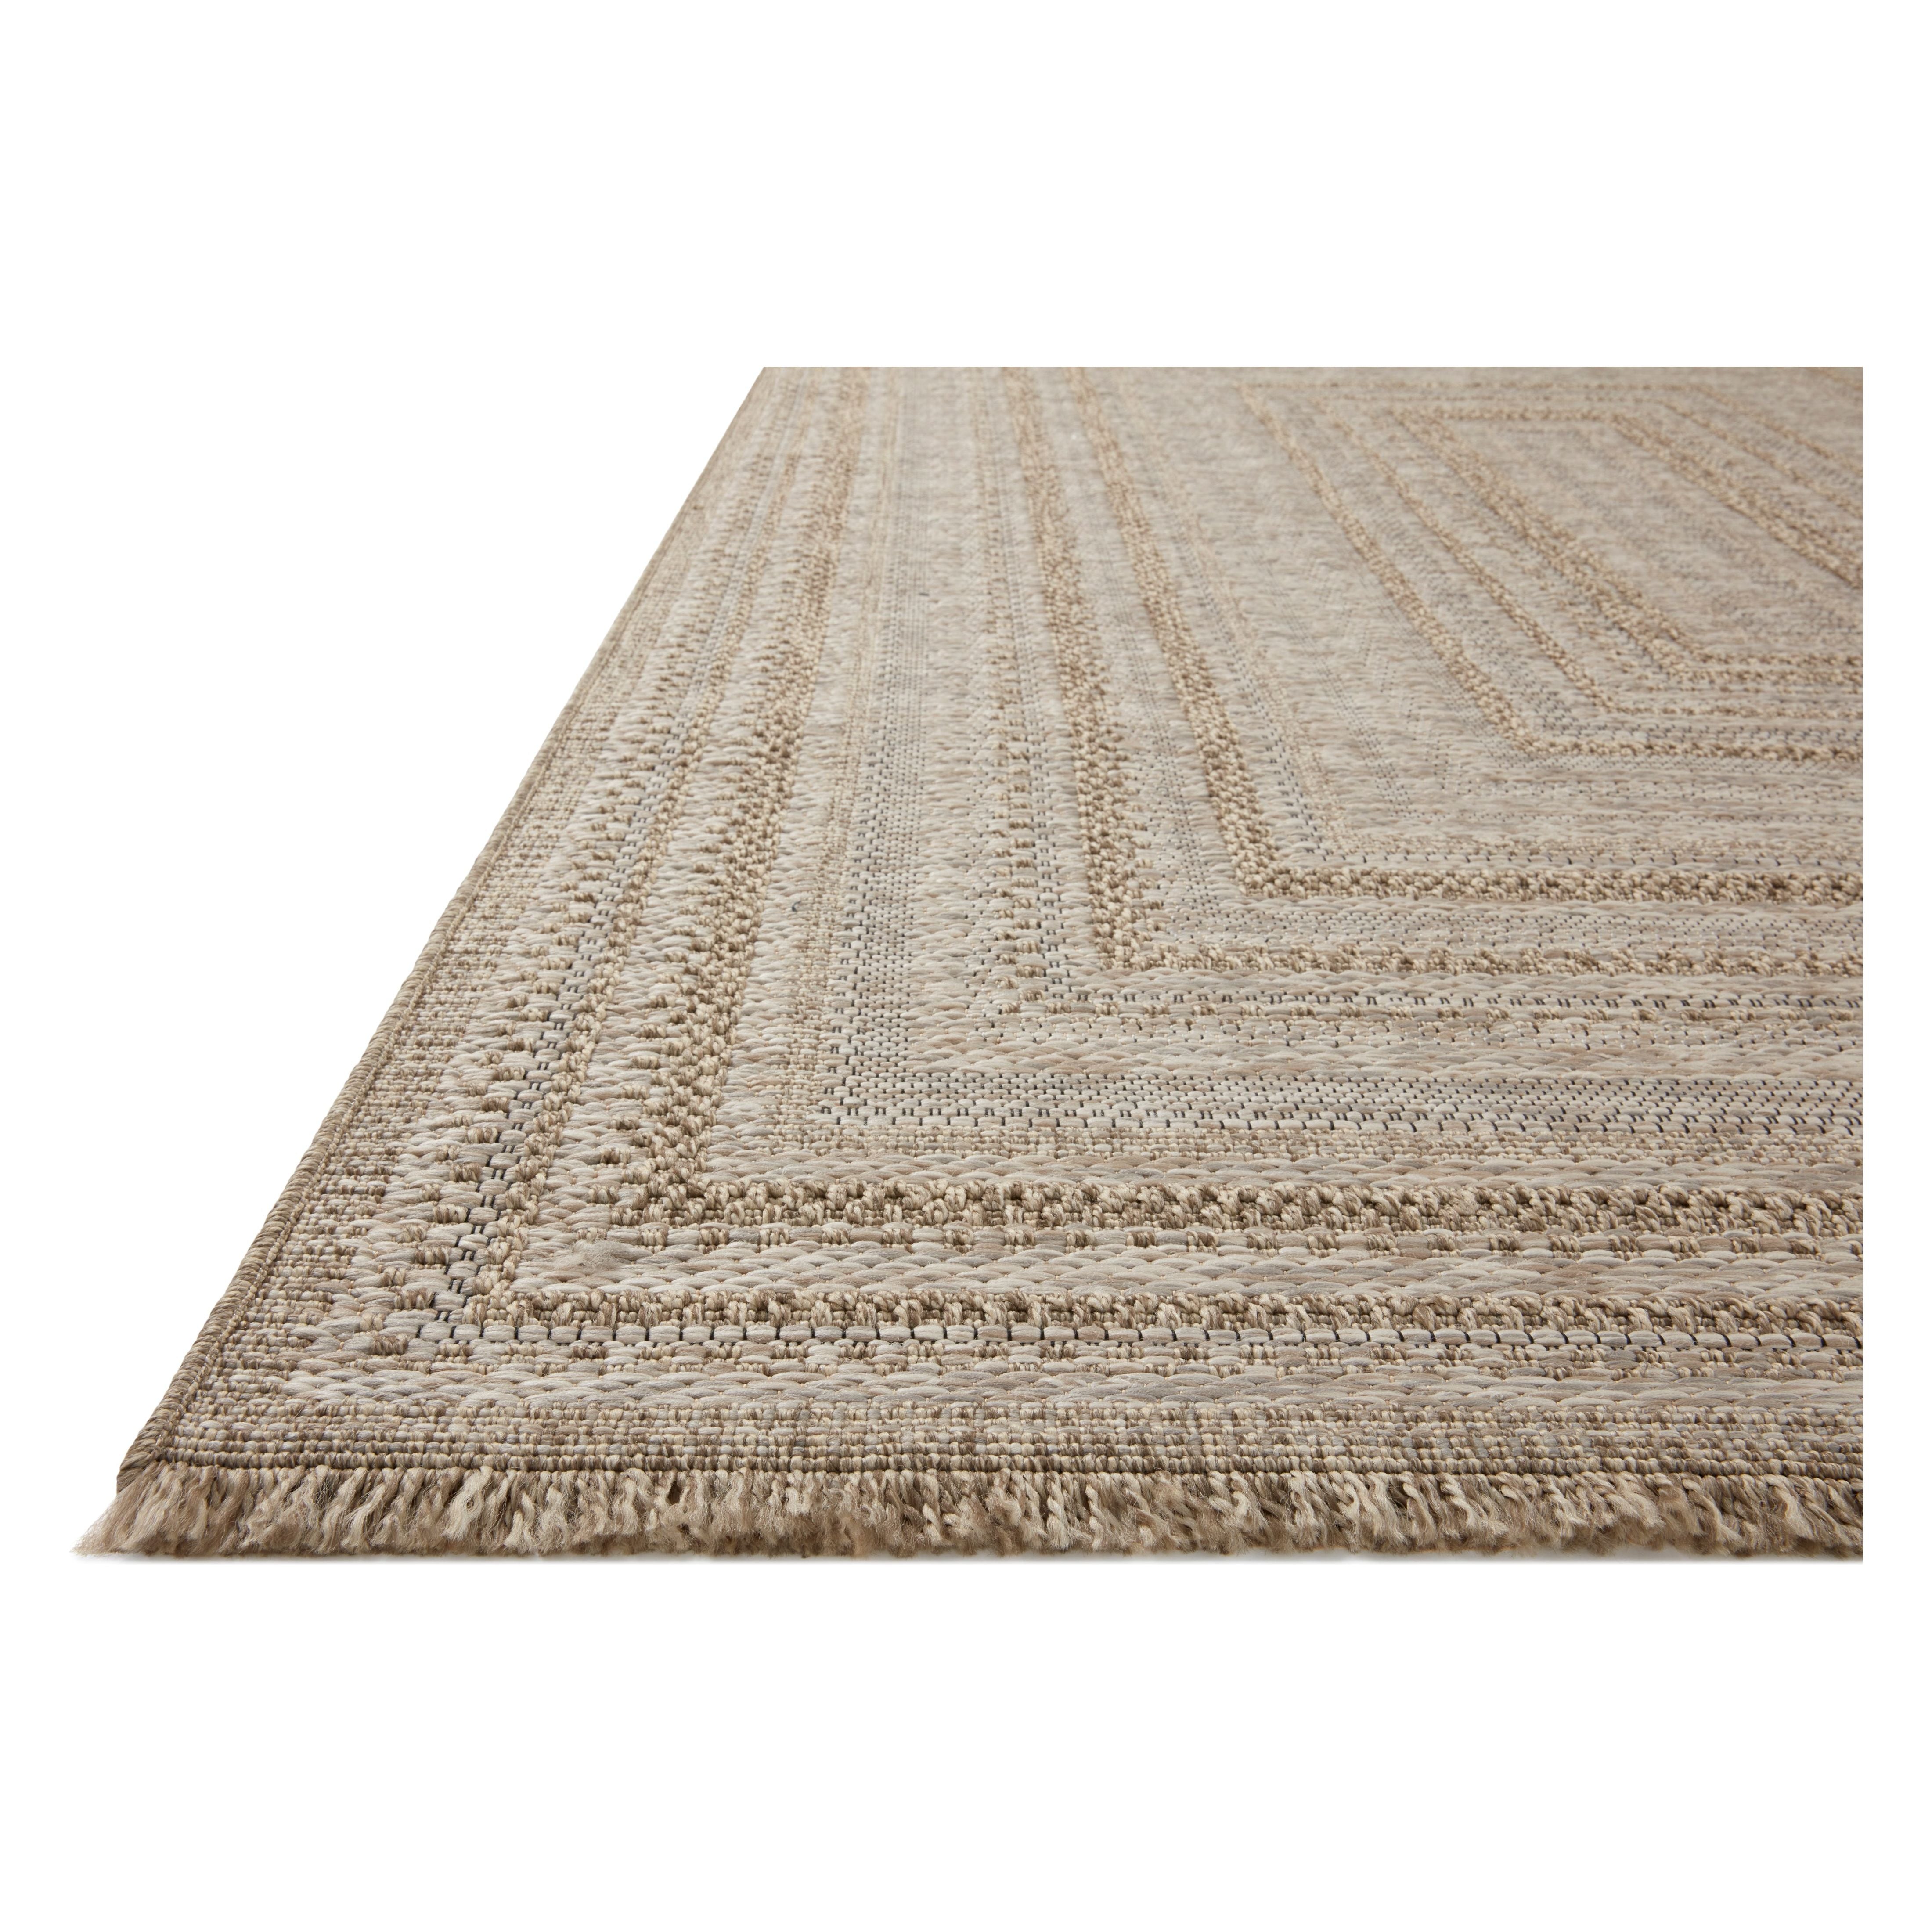 Made for sunny days ahead, the Dawn Natural DAW-01 rug is an indoor/outdoor rug that looks like a woven sisal rug but is power-loomed of 100% polypropylene, which makes it water- and mildew-resistant (so it's ready for rainy days ahead, too). Amethyst Home provides interior design, new home construction design consulting, vintage area rugs, and lighting in the Portland metro area.